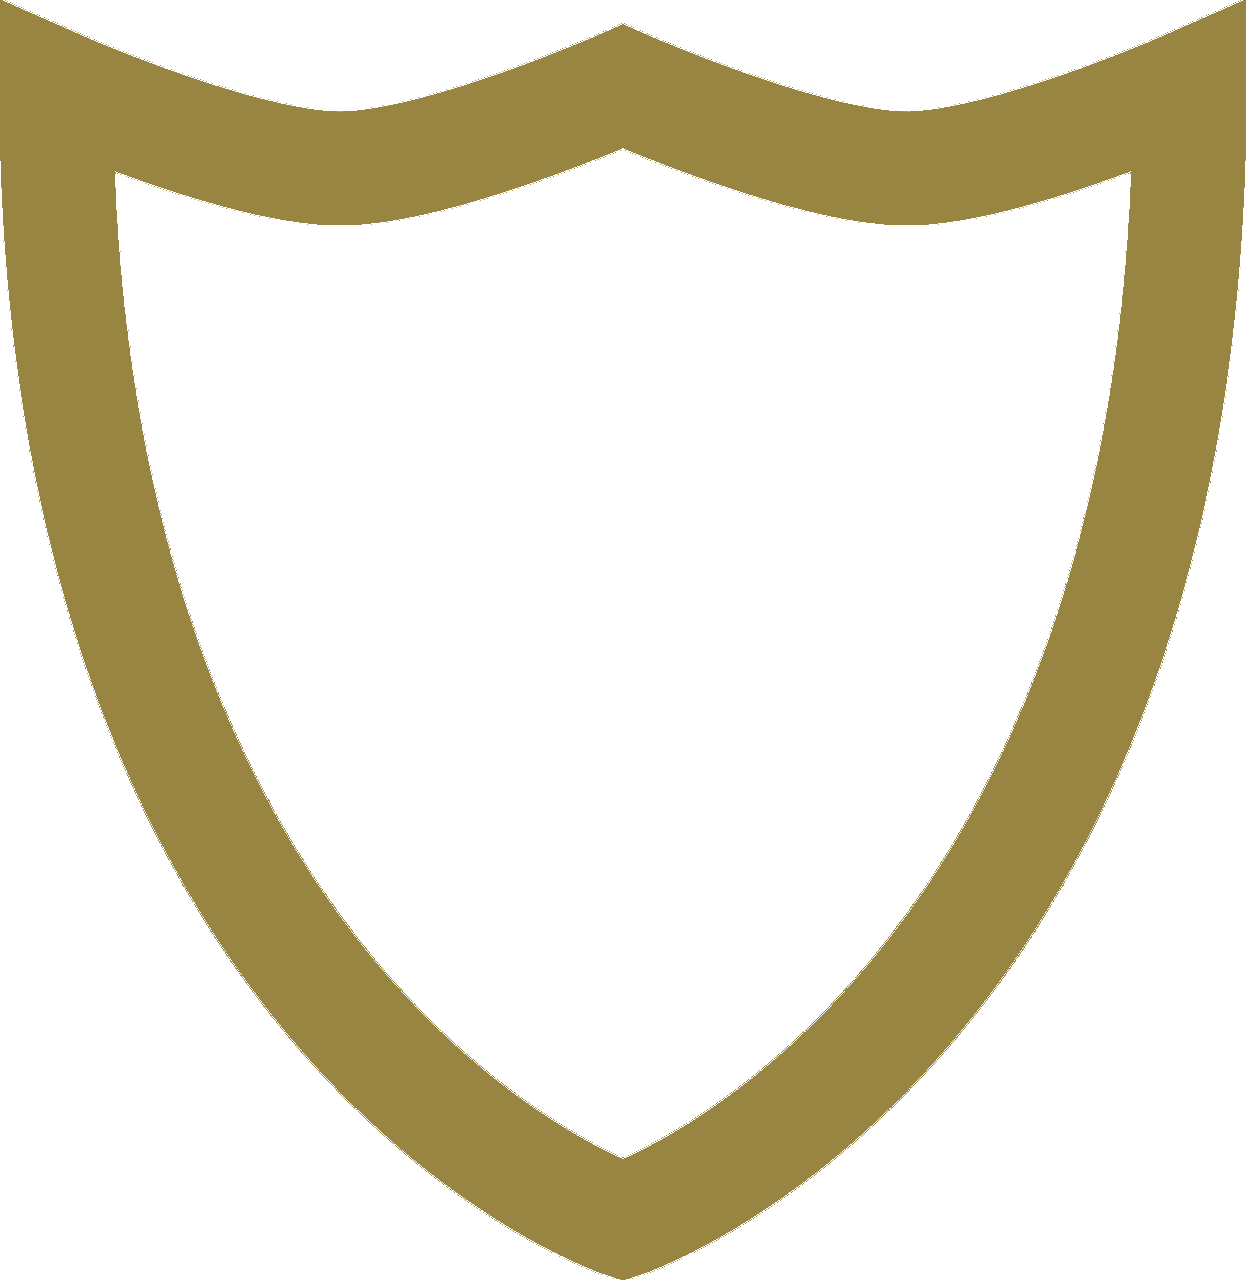 gold outline of a shield signifying secure protection of documents